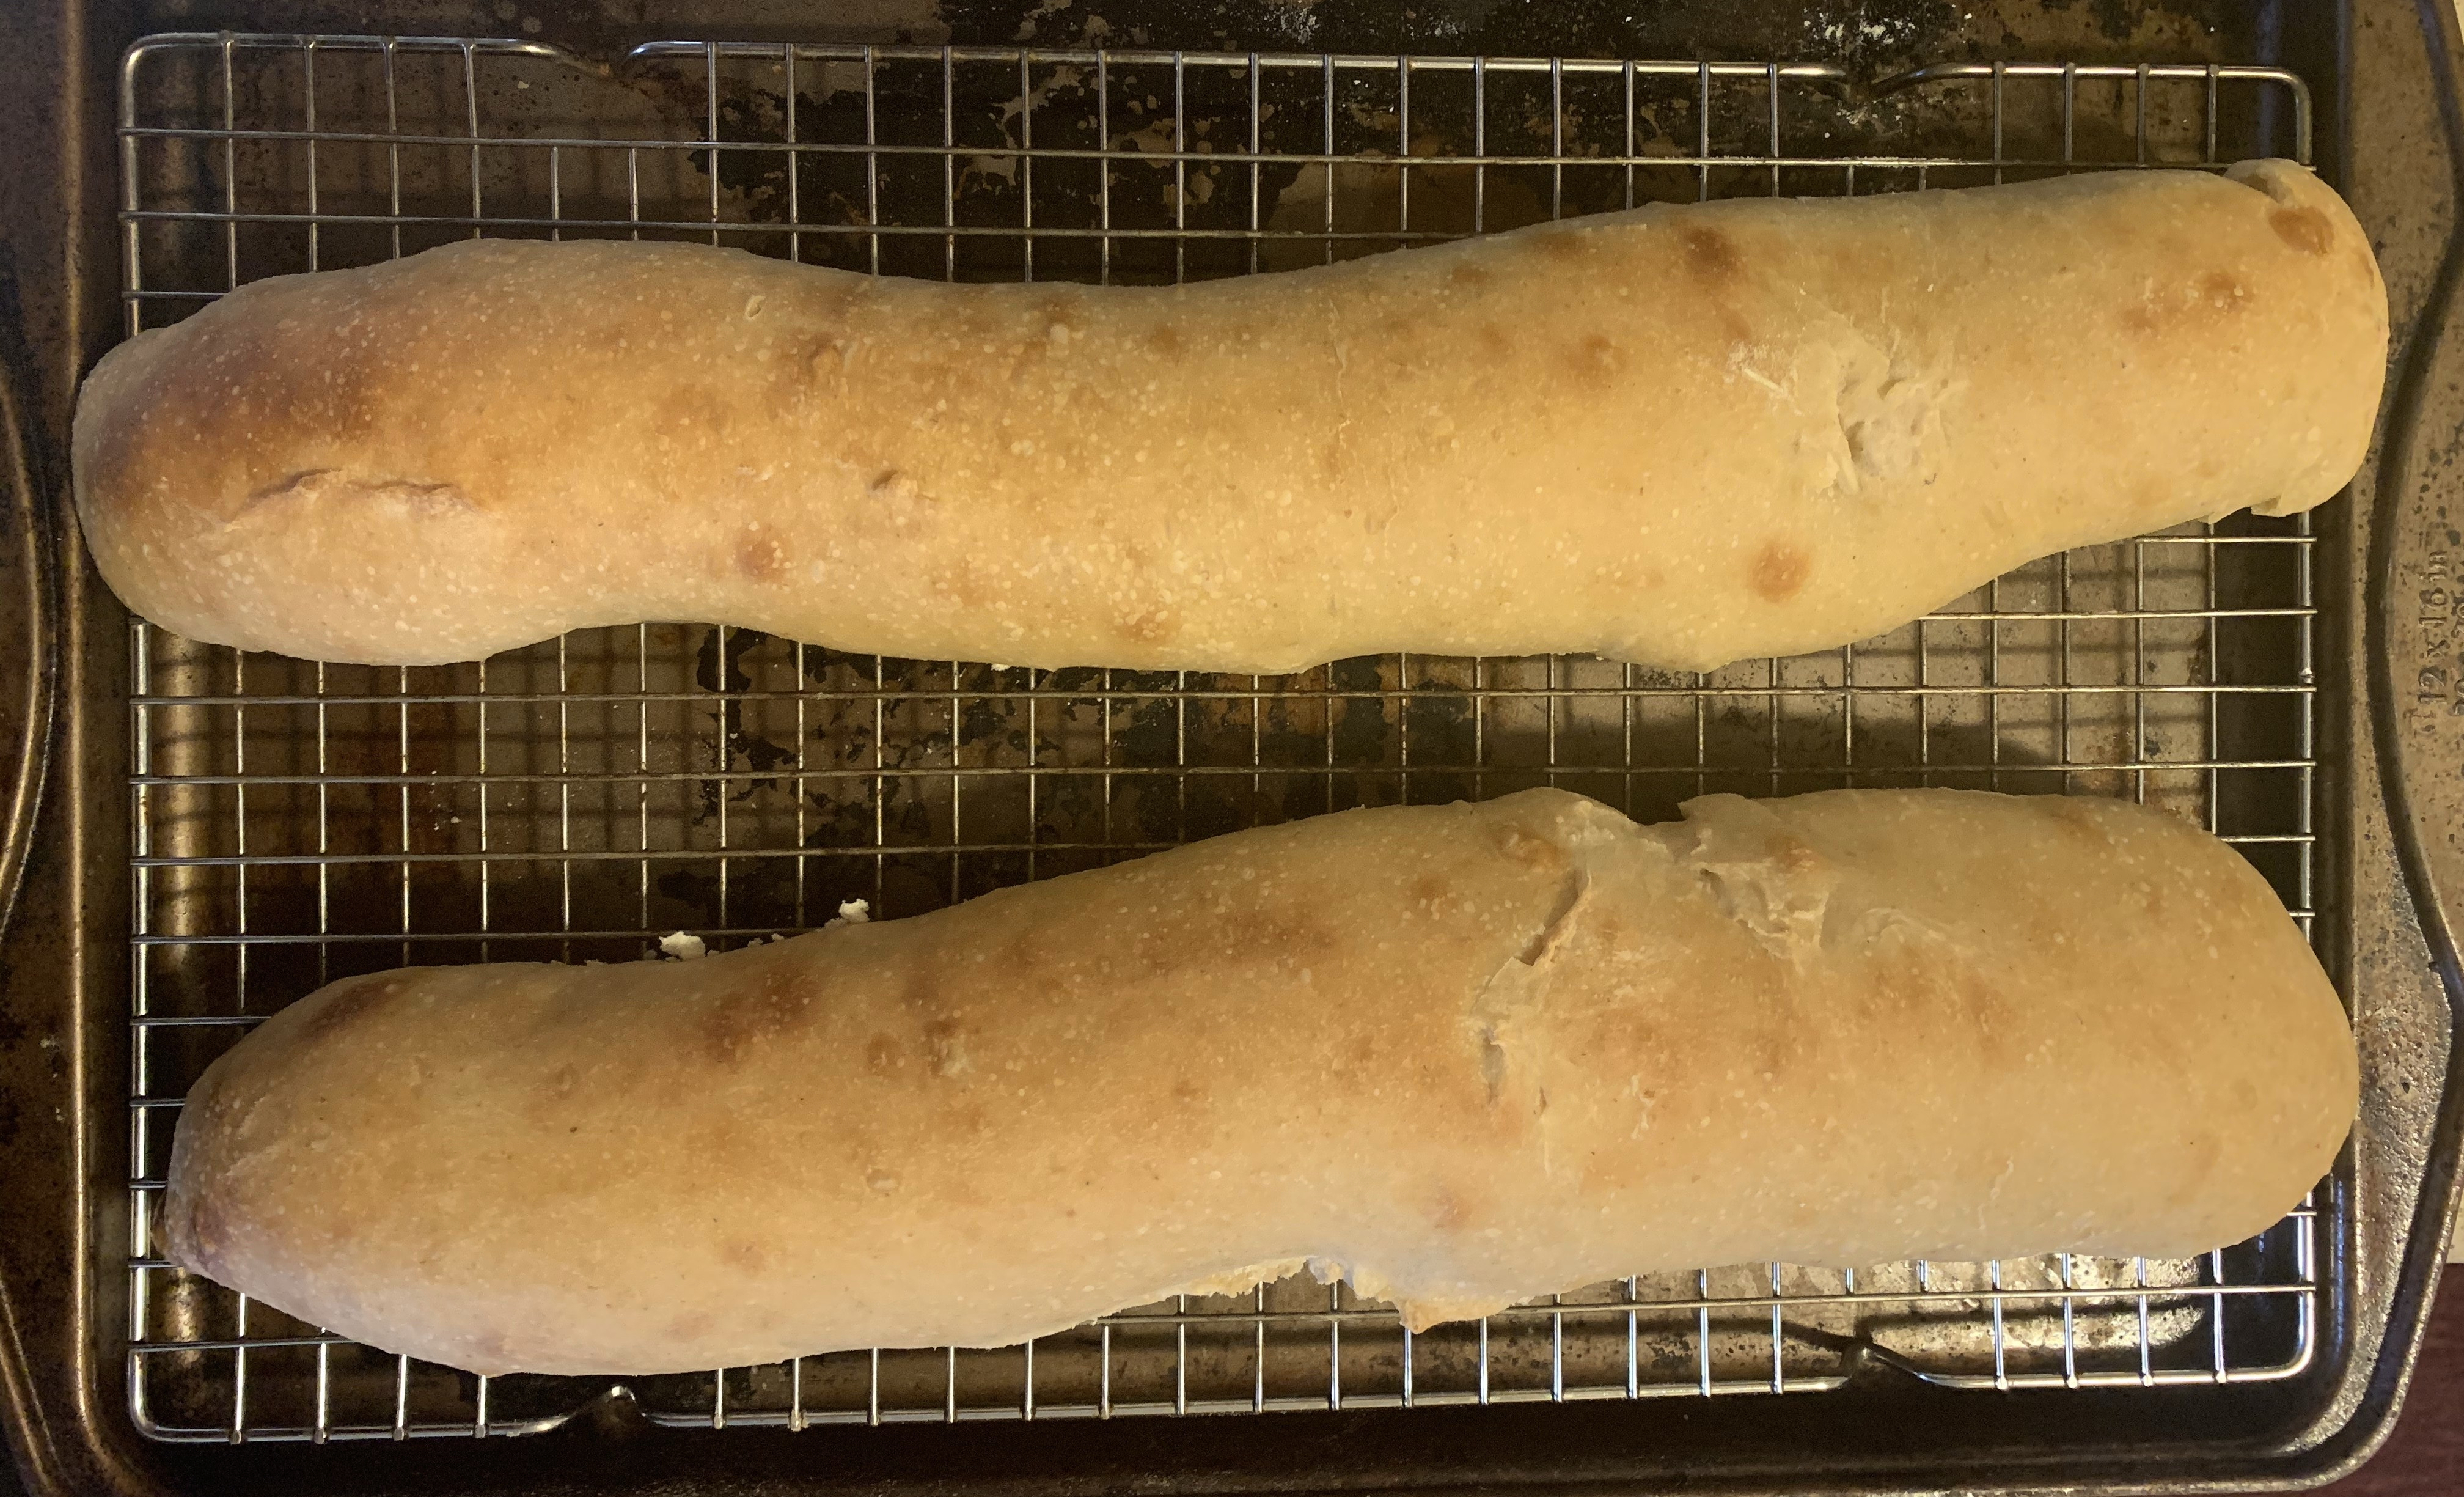 Two loaves of bread with golden brown crusts, sitting on a wire rack in a baking sheet.